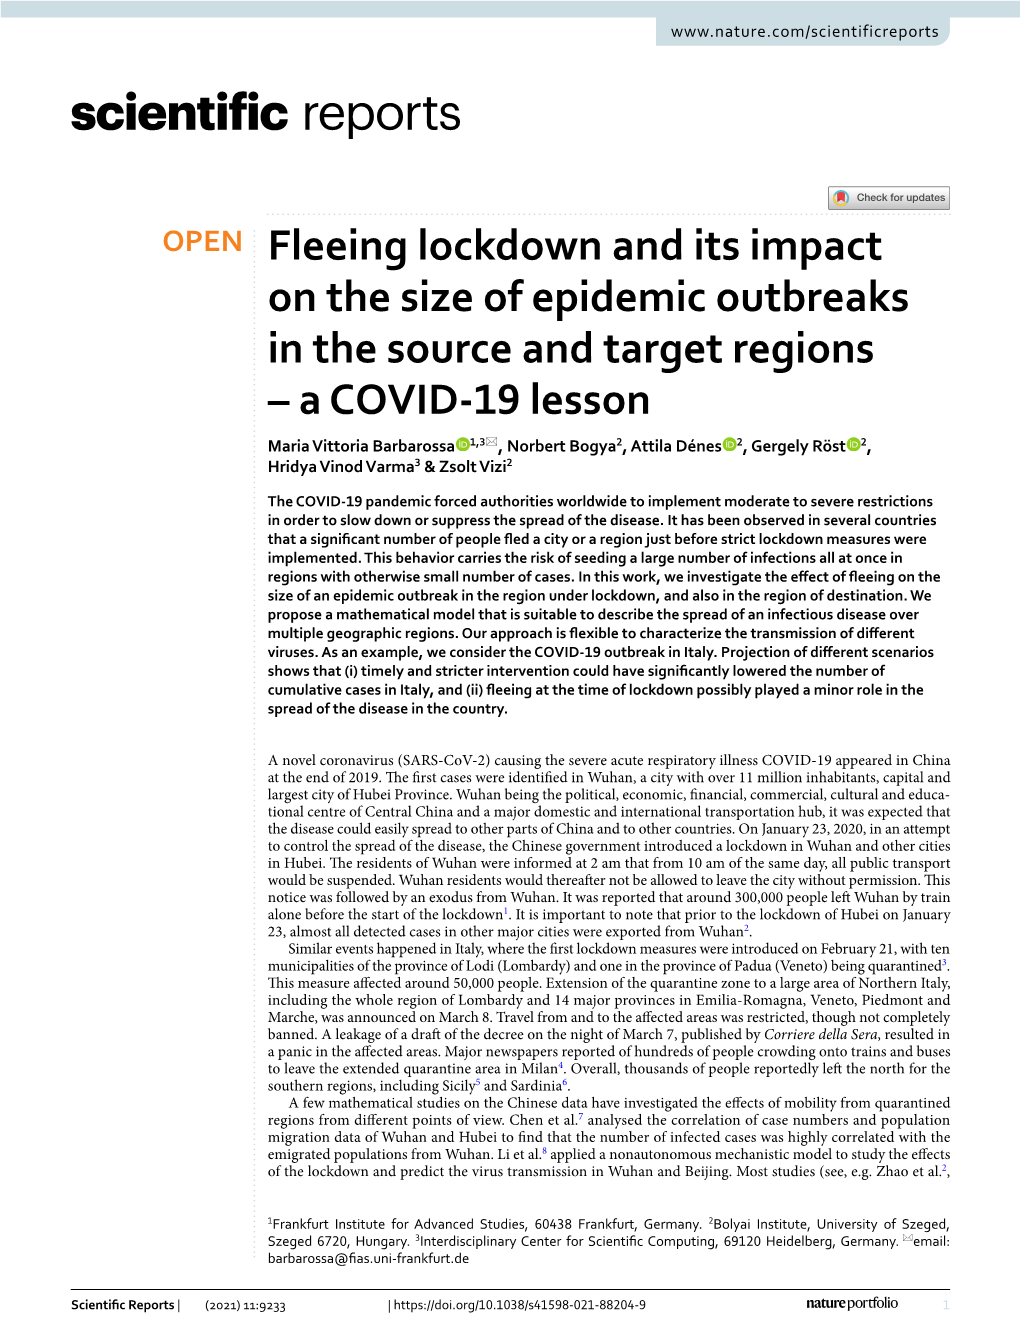 Fleeing Lockdown and Its Impact on the Size of Epidemic Outbreaks In